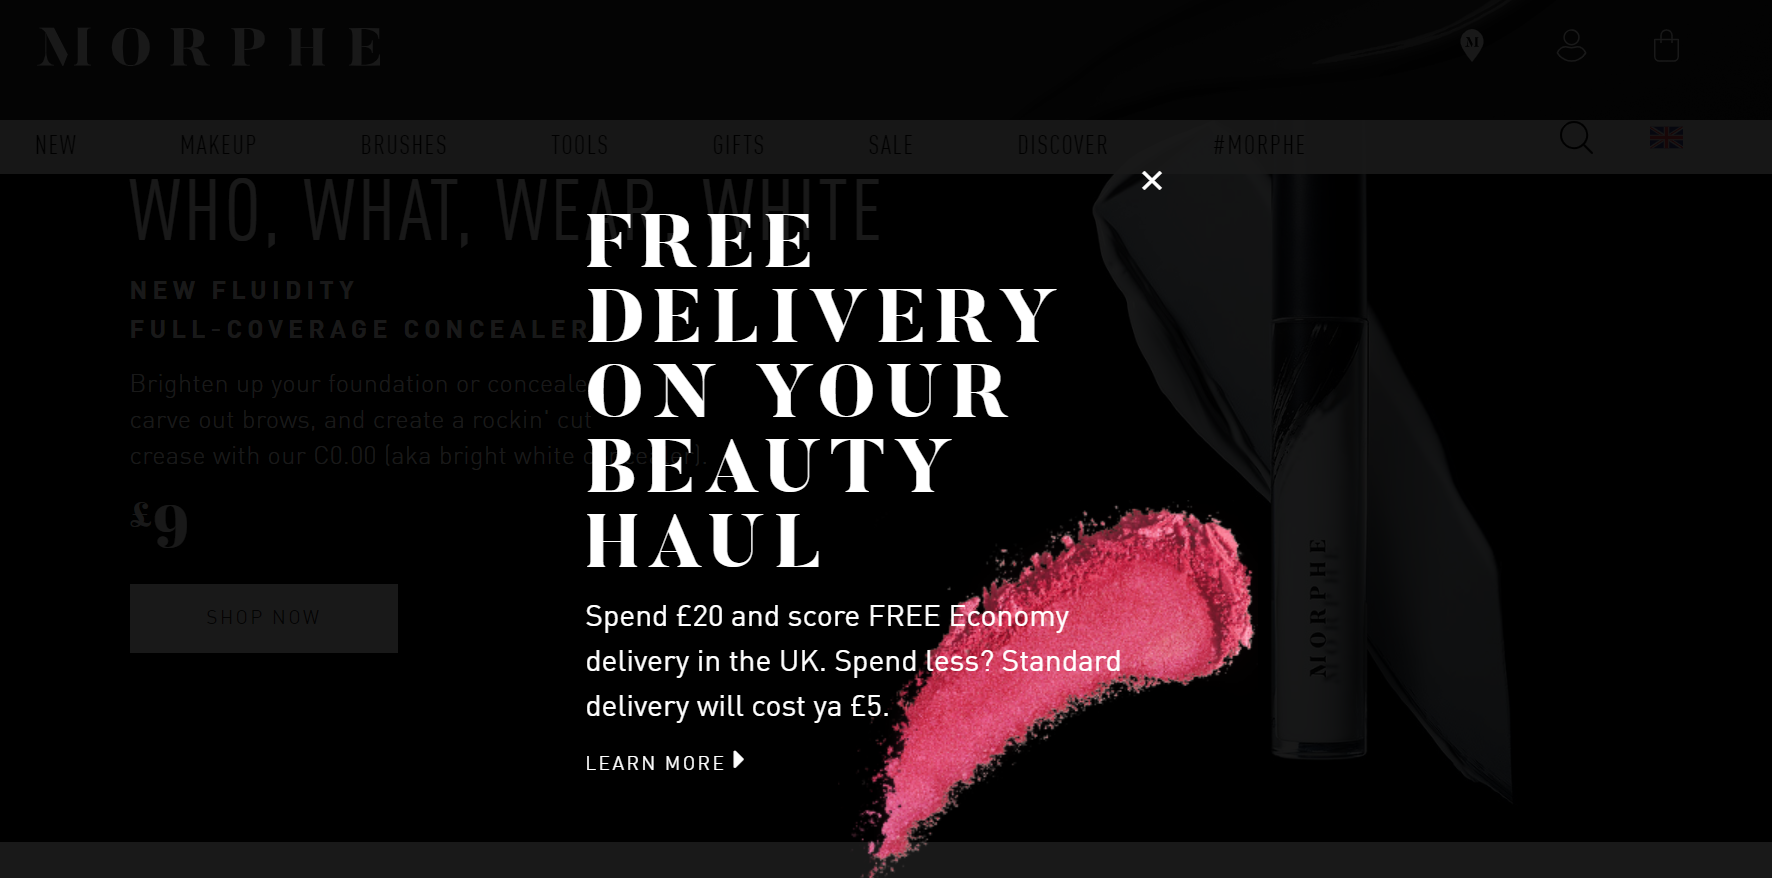 A screenshot from Morphe's online store to show an example of a free delivery ecommerce promotion.